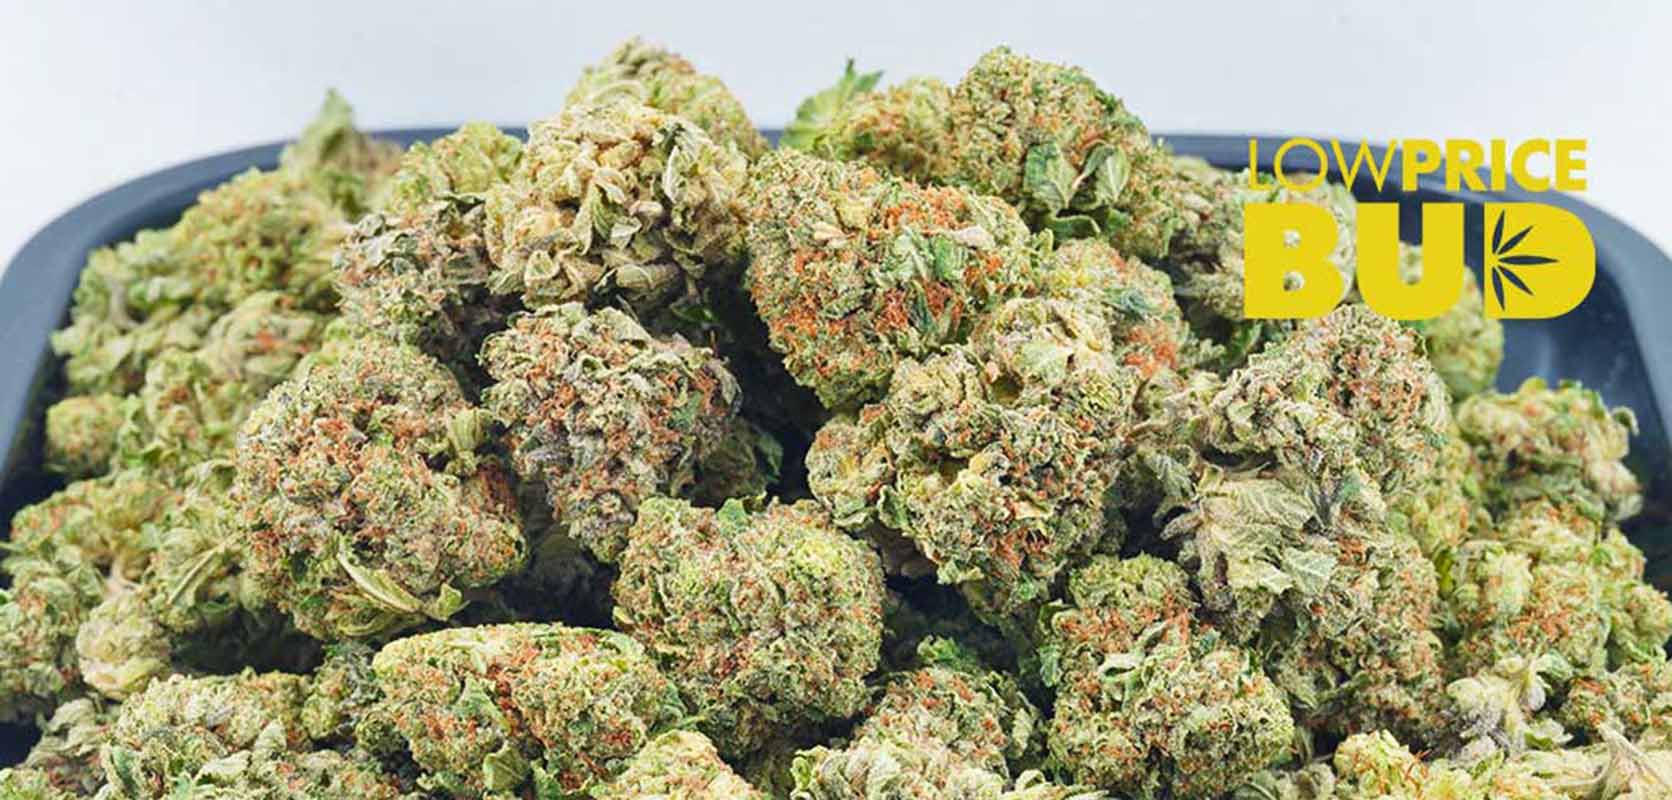 Buy Blue God AAA weed online in Canada from Low Price Bud online dispensary and mail order weed shop.